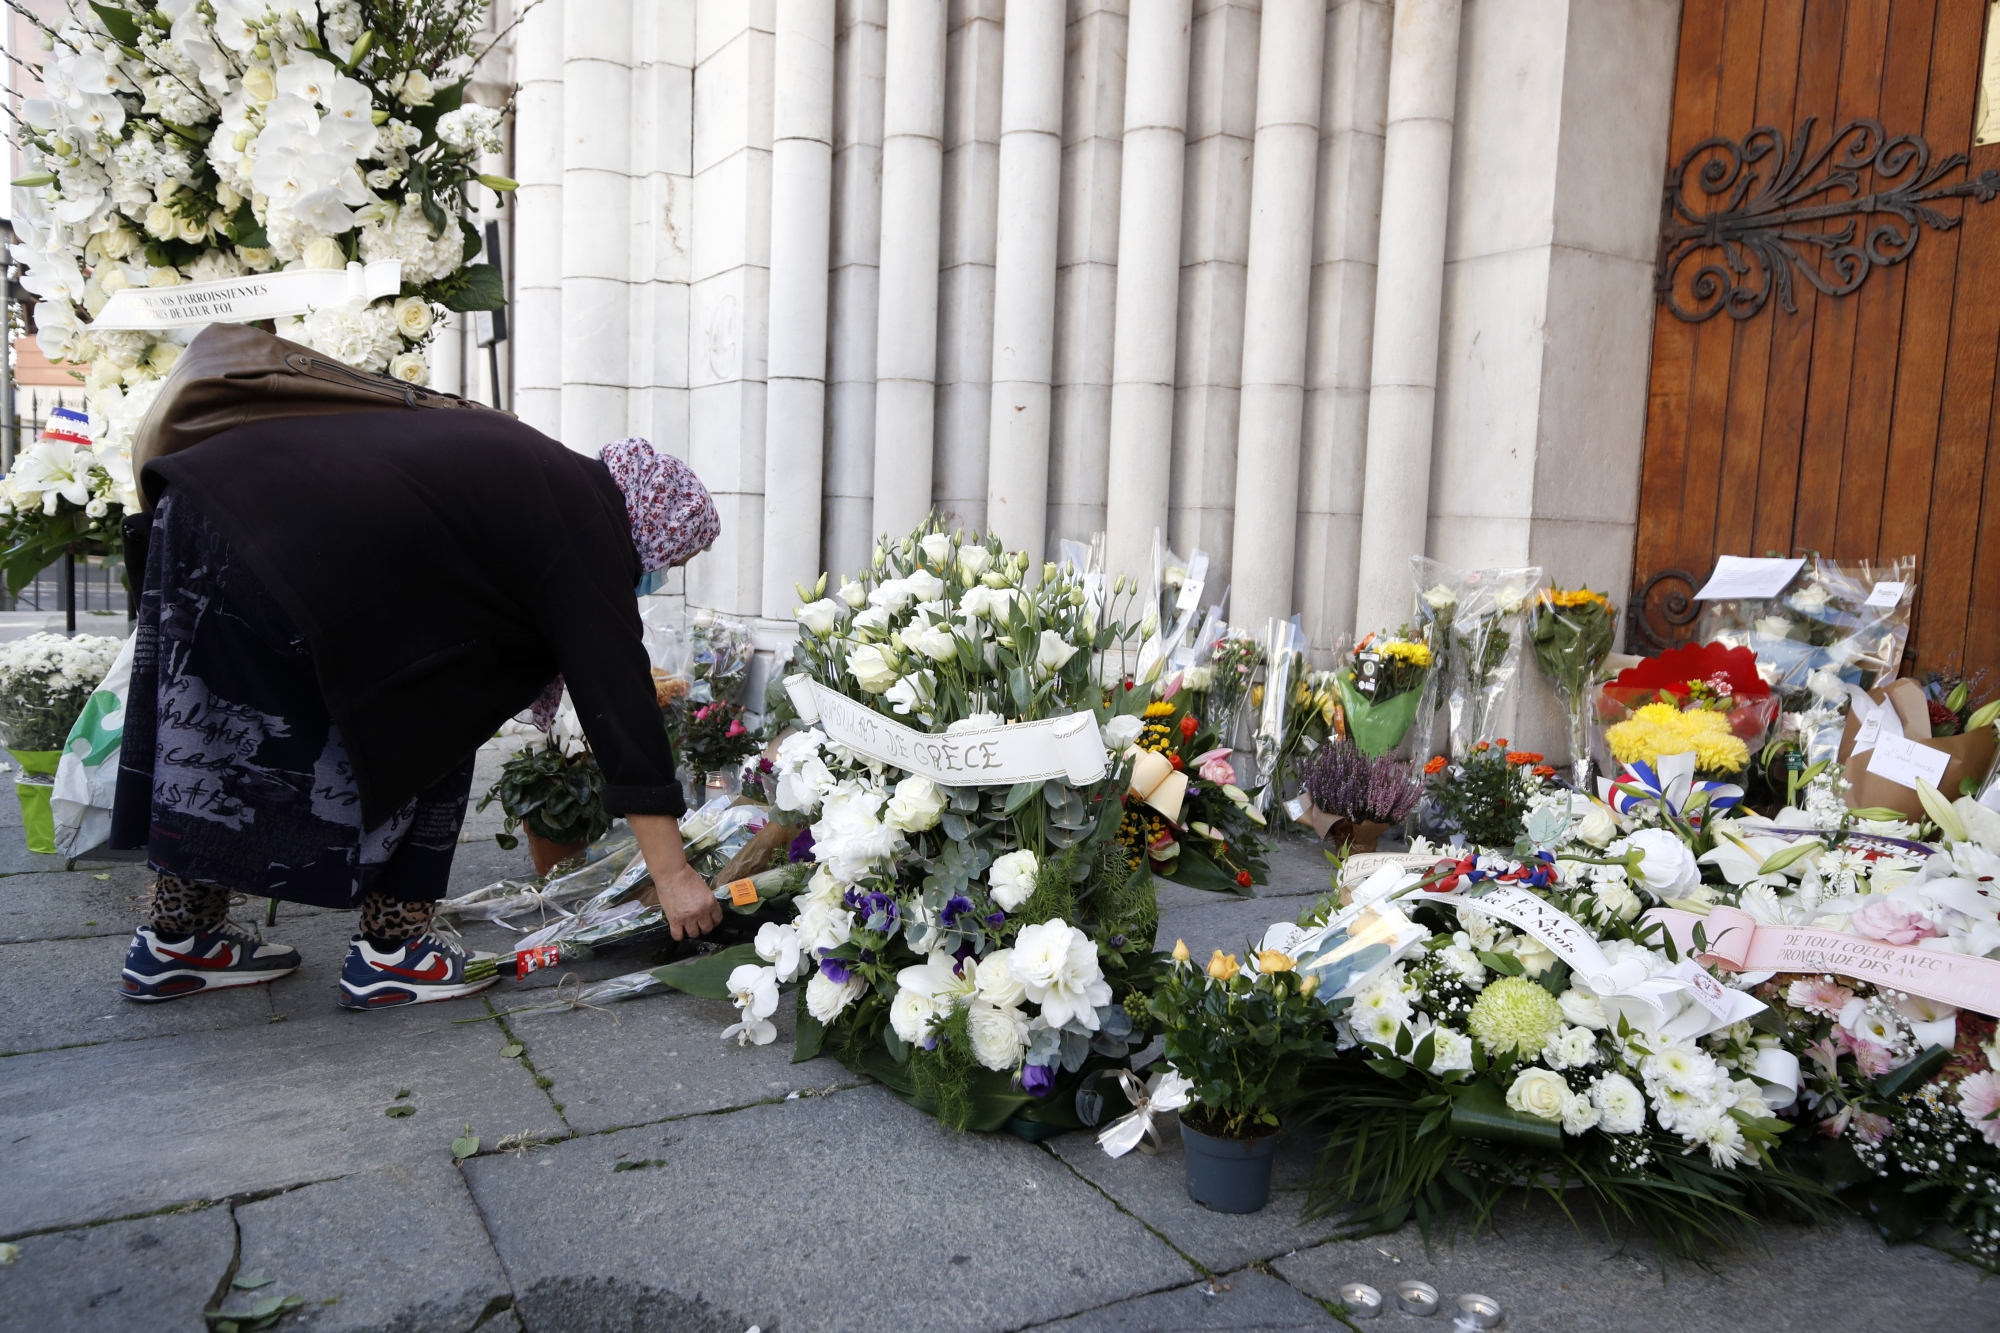 epa08785649 A woman lays flowers on a makeshift memorial to the victims of the knife attack at the entrance of the Notre Dame Basilica church in Nice, France, 30 October 2020. Three people have died in a terror attack. The attack comes less than a month after the beheading of a French middle school teacher in Paris on 16 October.  EPA/SEBASTIEN NOGIER ArcInfo